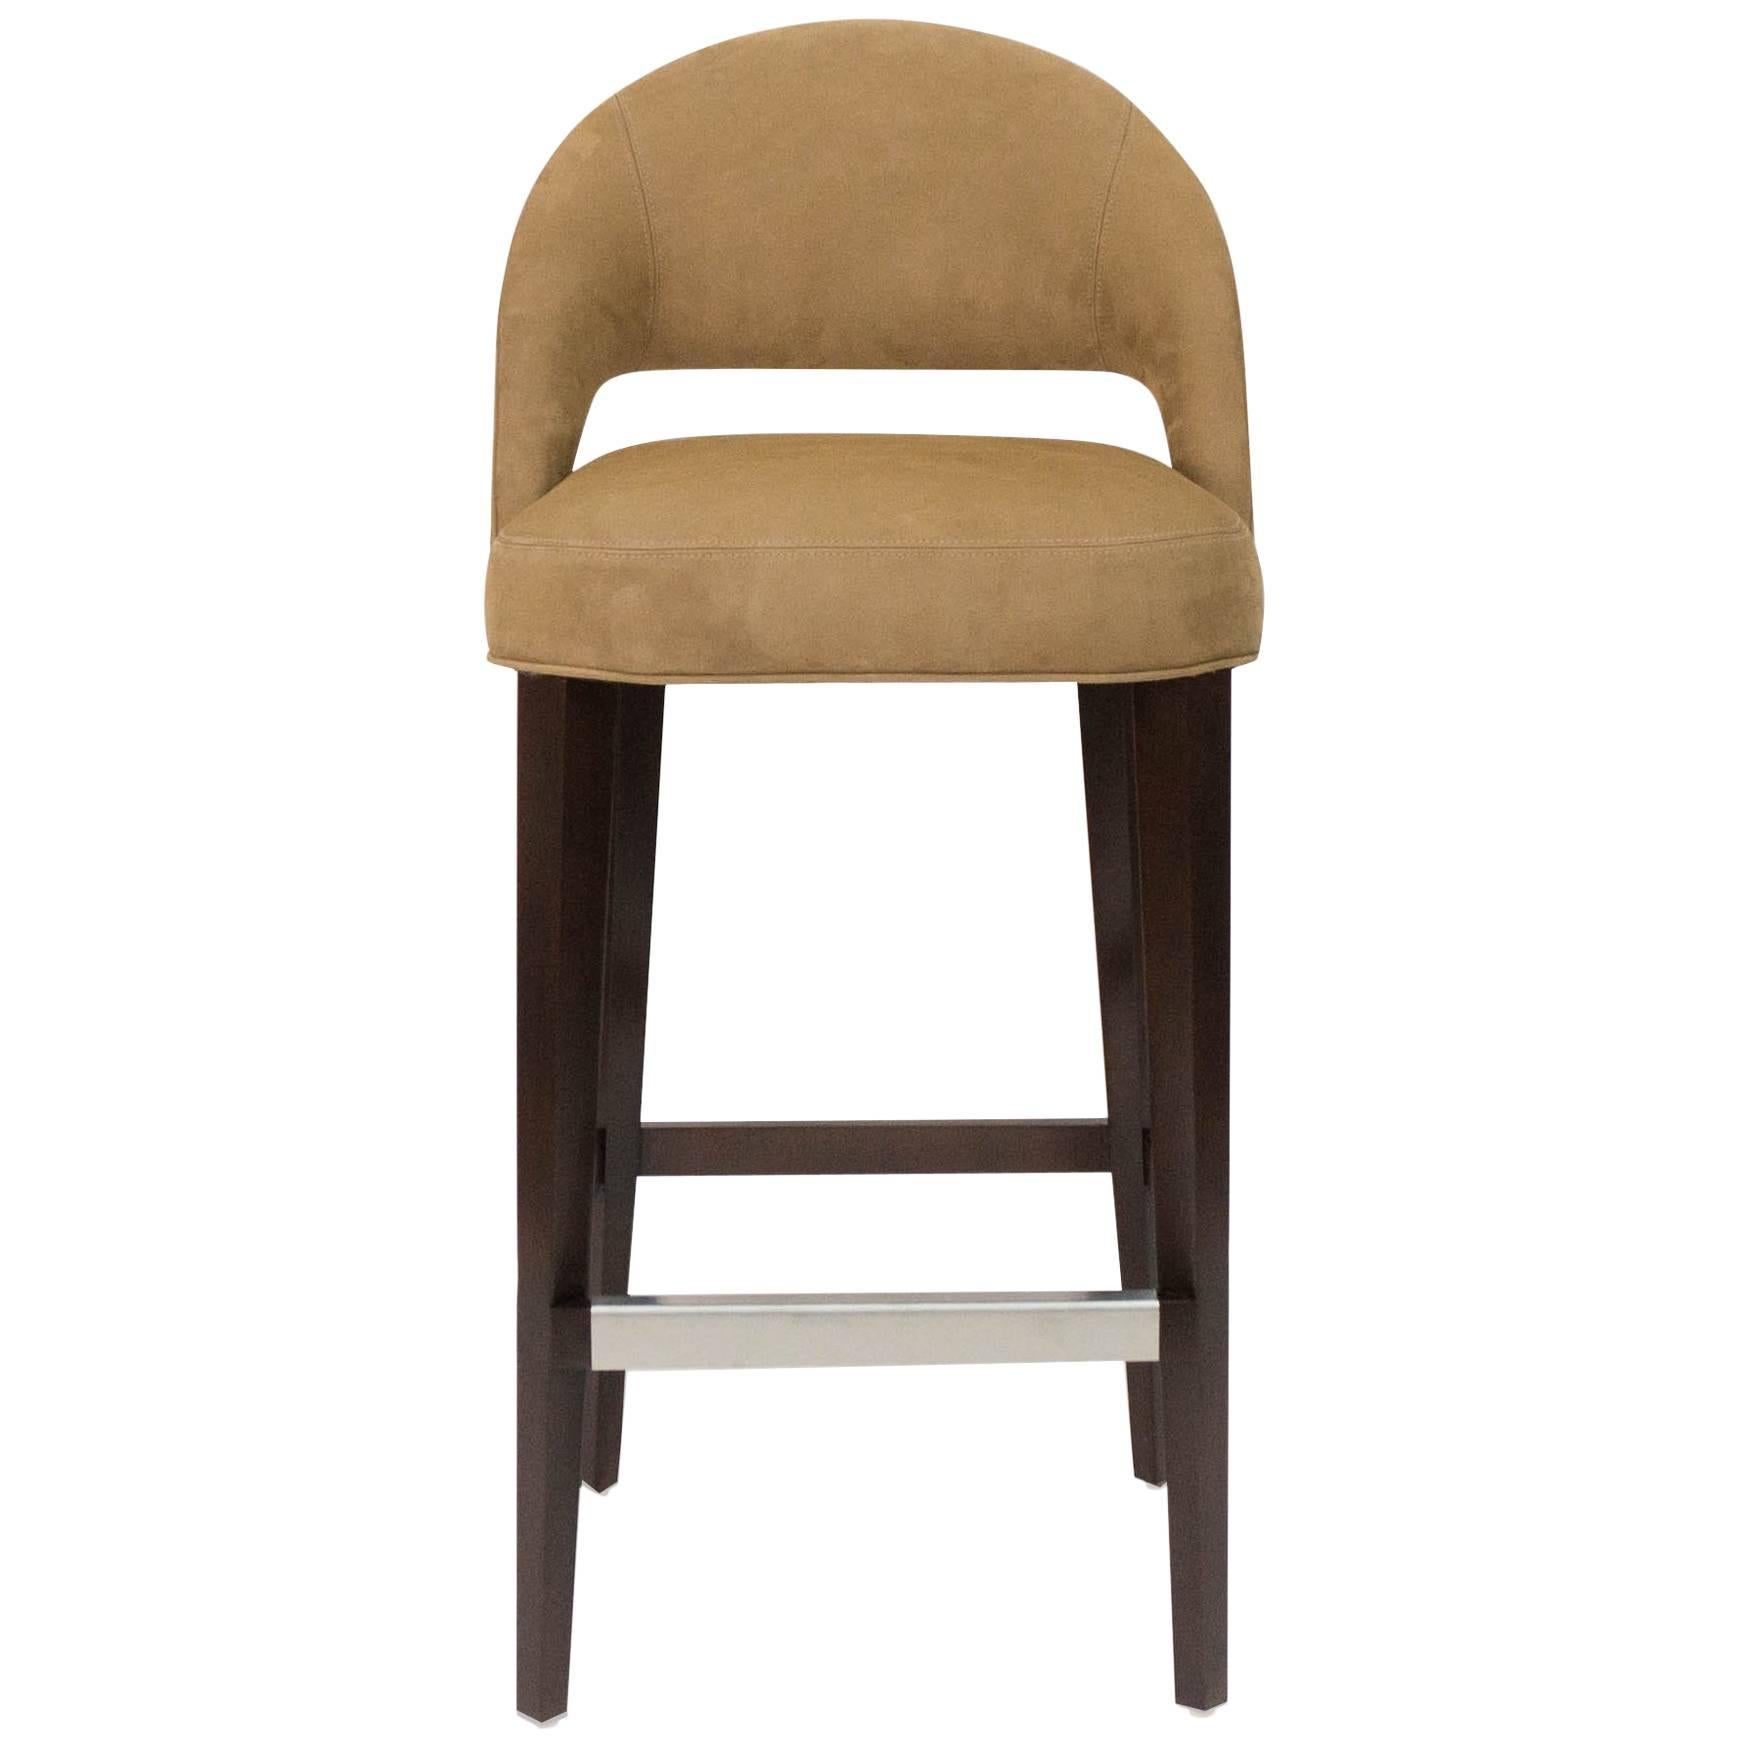 Bar or Counter Stool with Bucket Seat, Modern, Art Deco